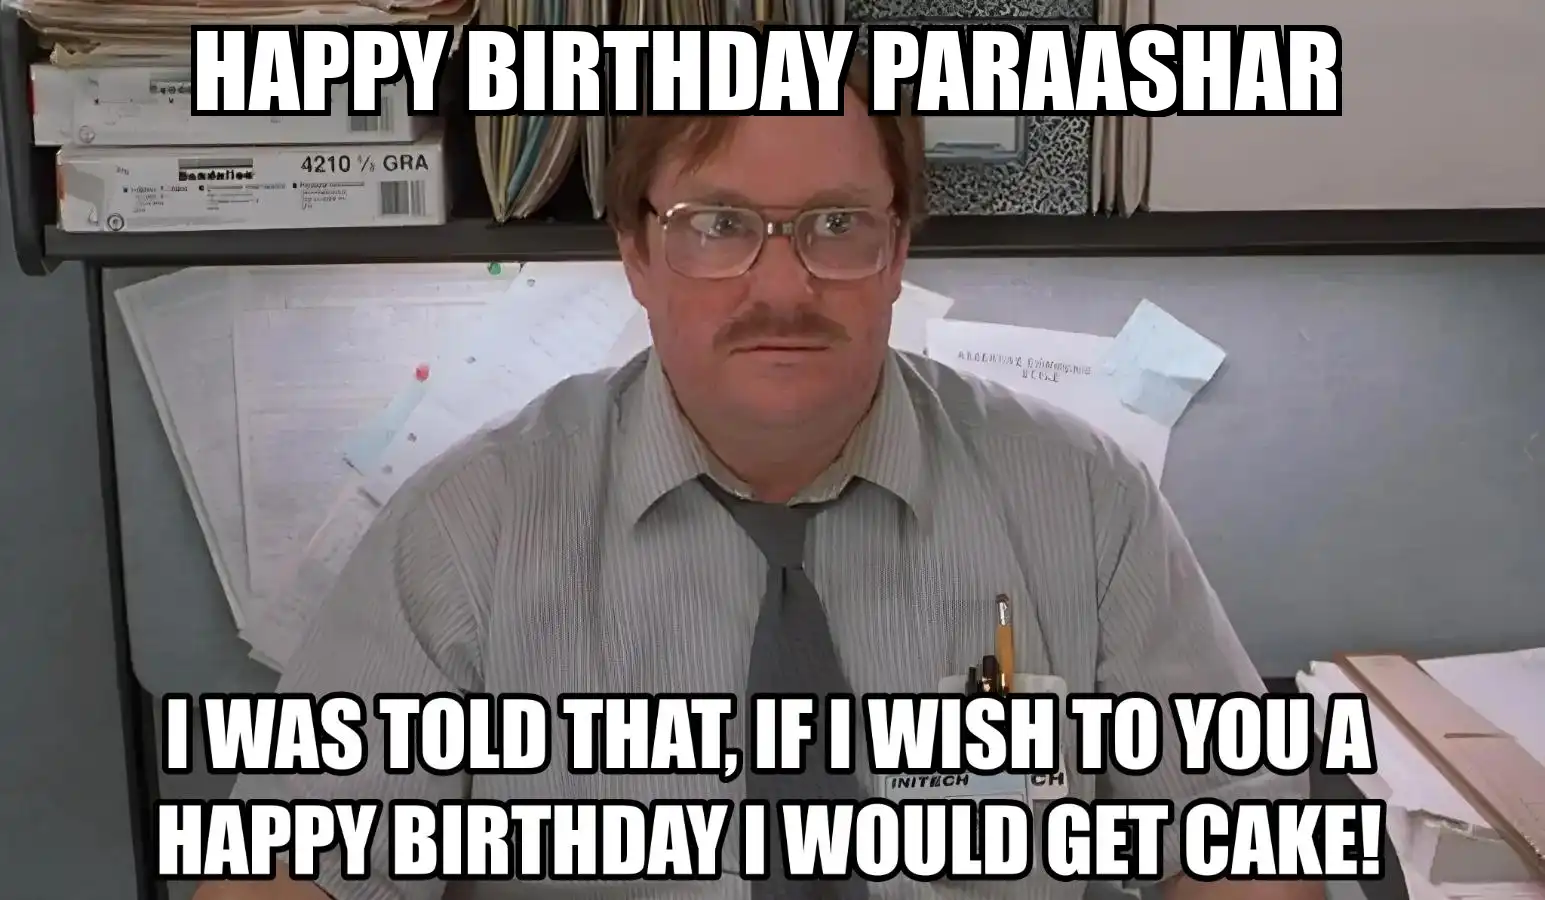 Happy Birthday Paraashar I Would Get A Cake Meme